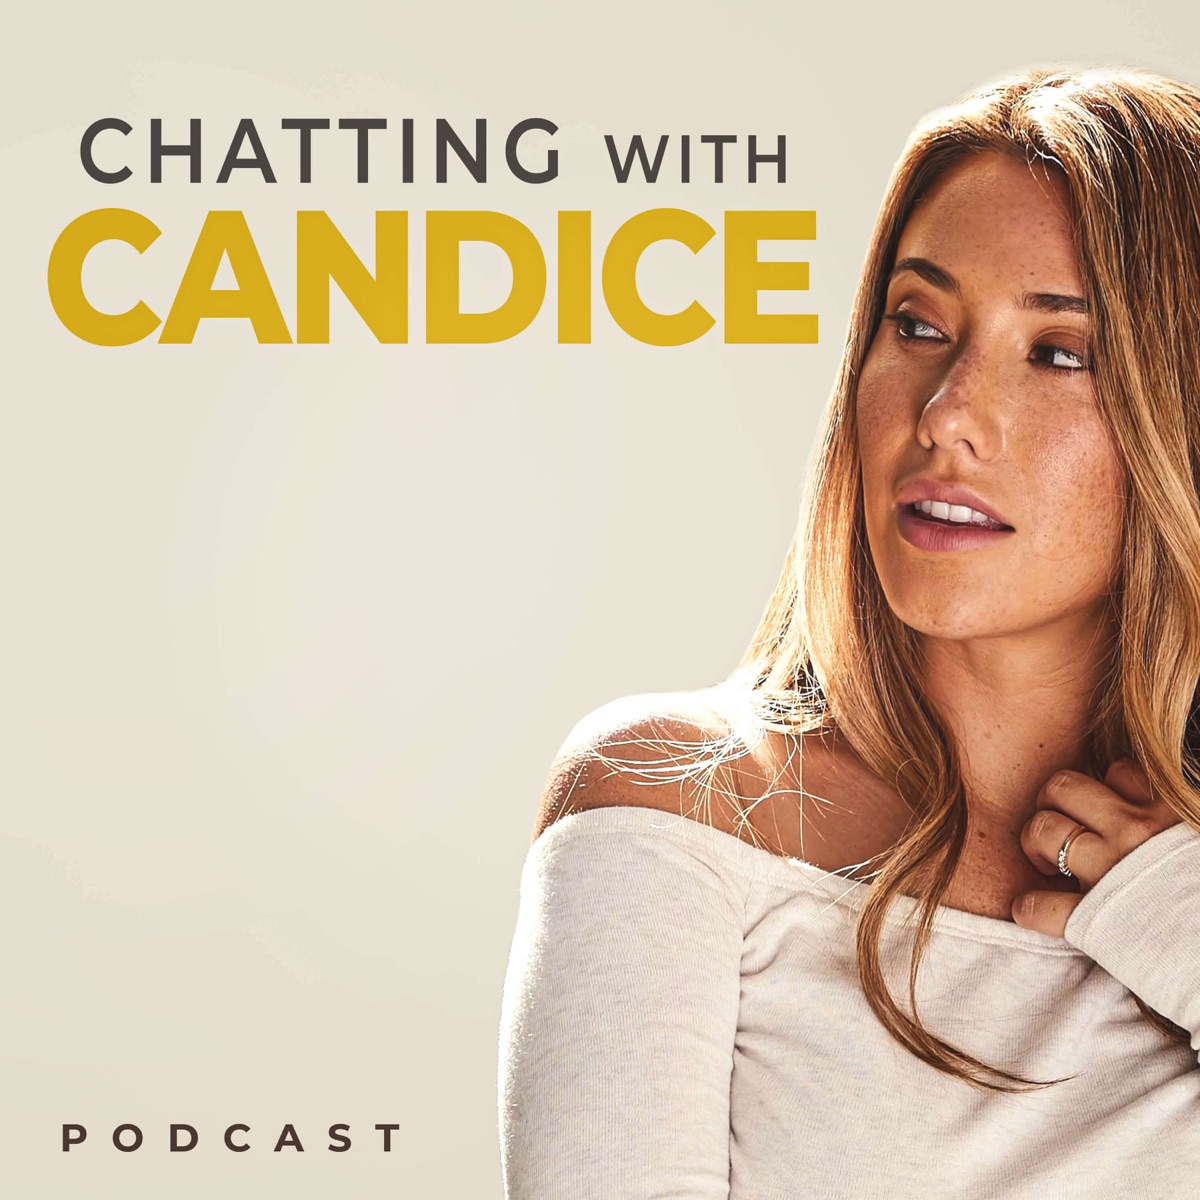 Dani Daniels Sex Vidios Xnx - 1 Catching up with Dani Daniels â€“ Chatting with Candice â€“ Podcast â€“ Podtail